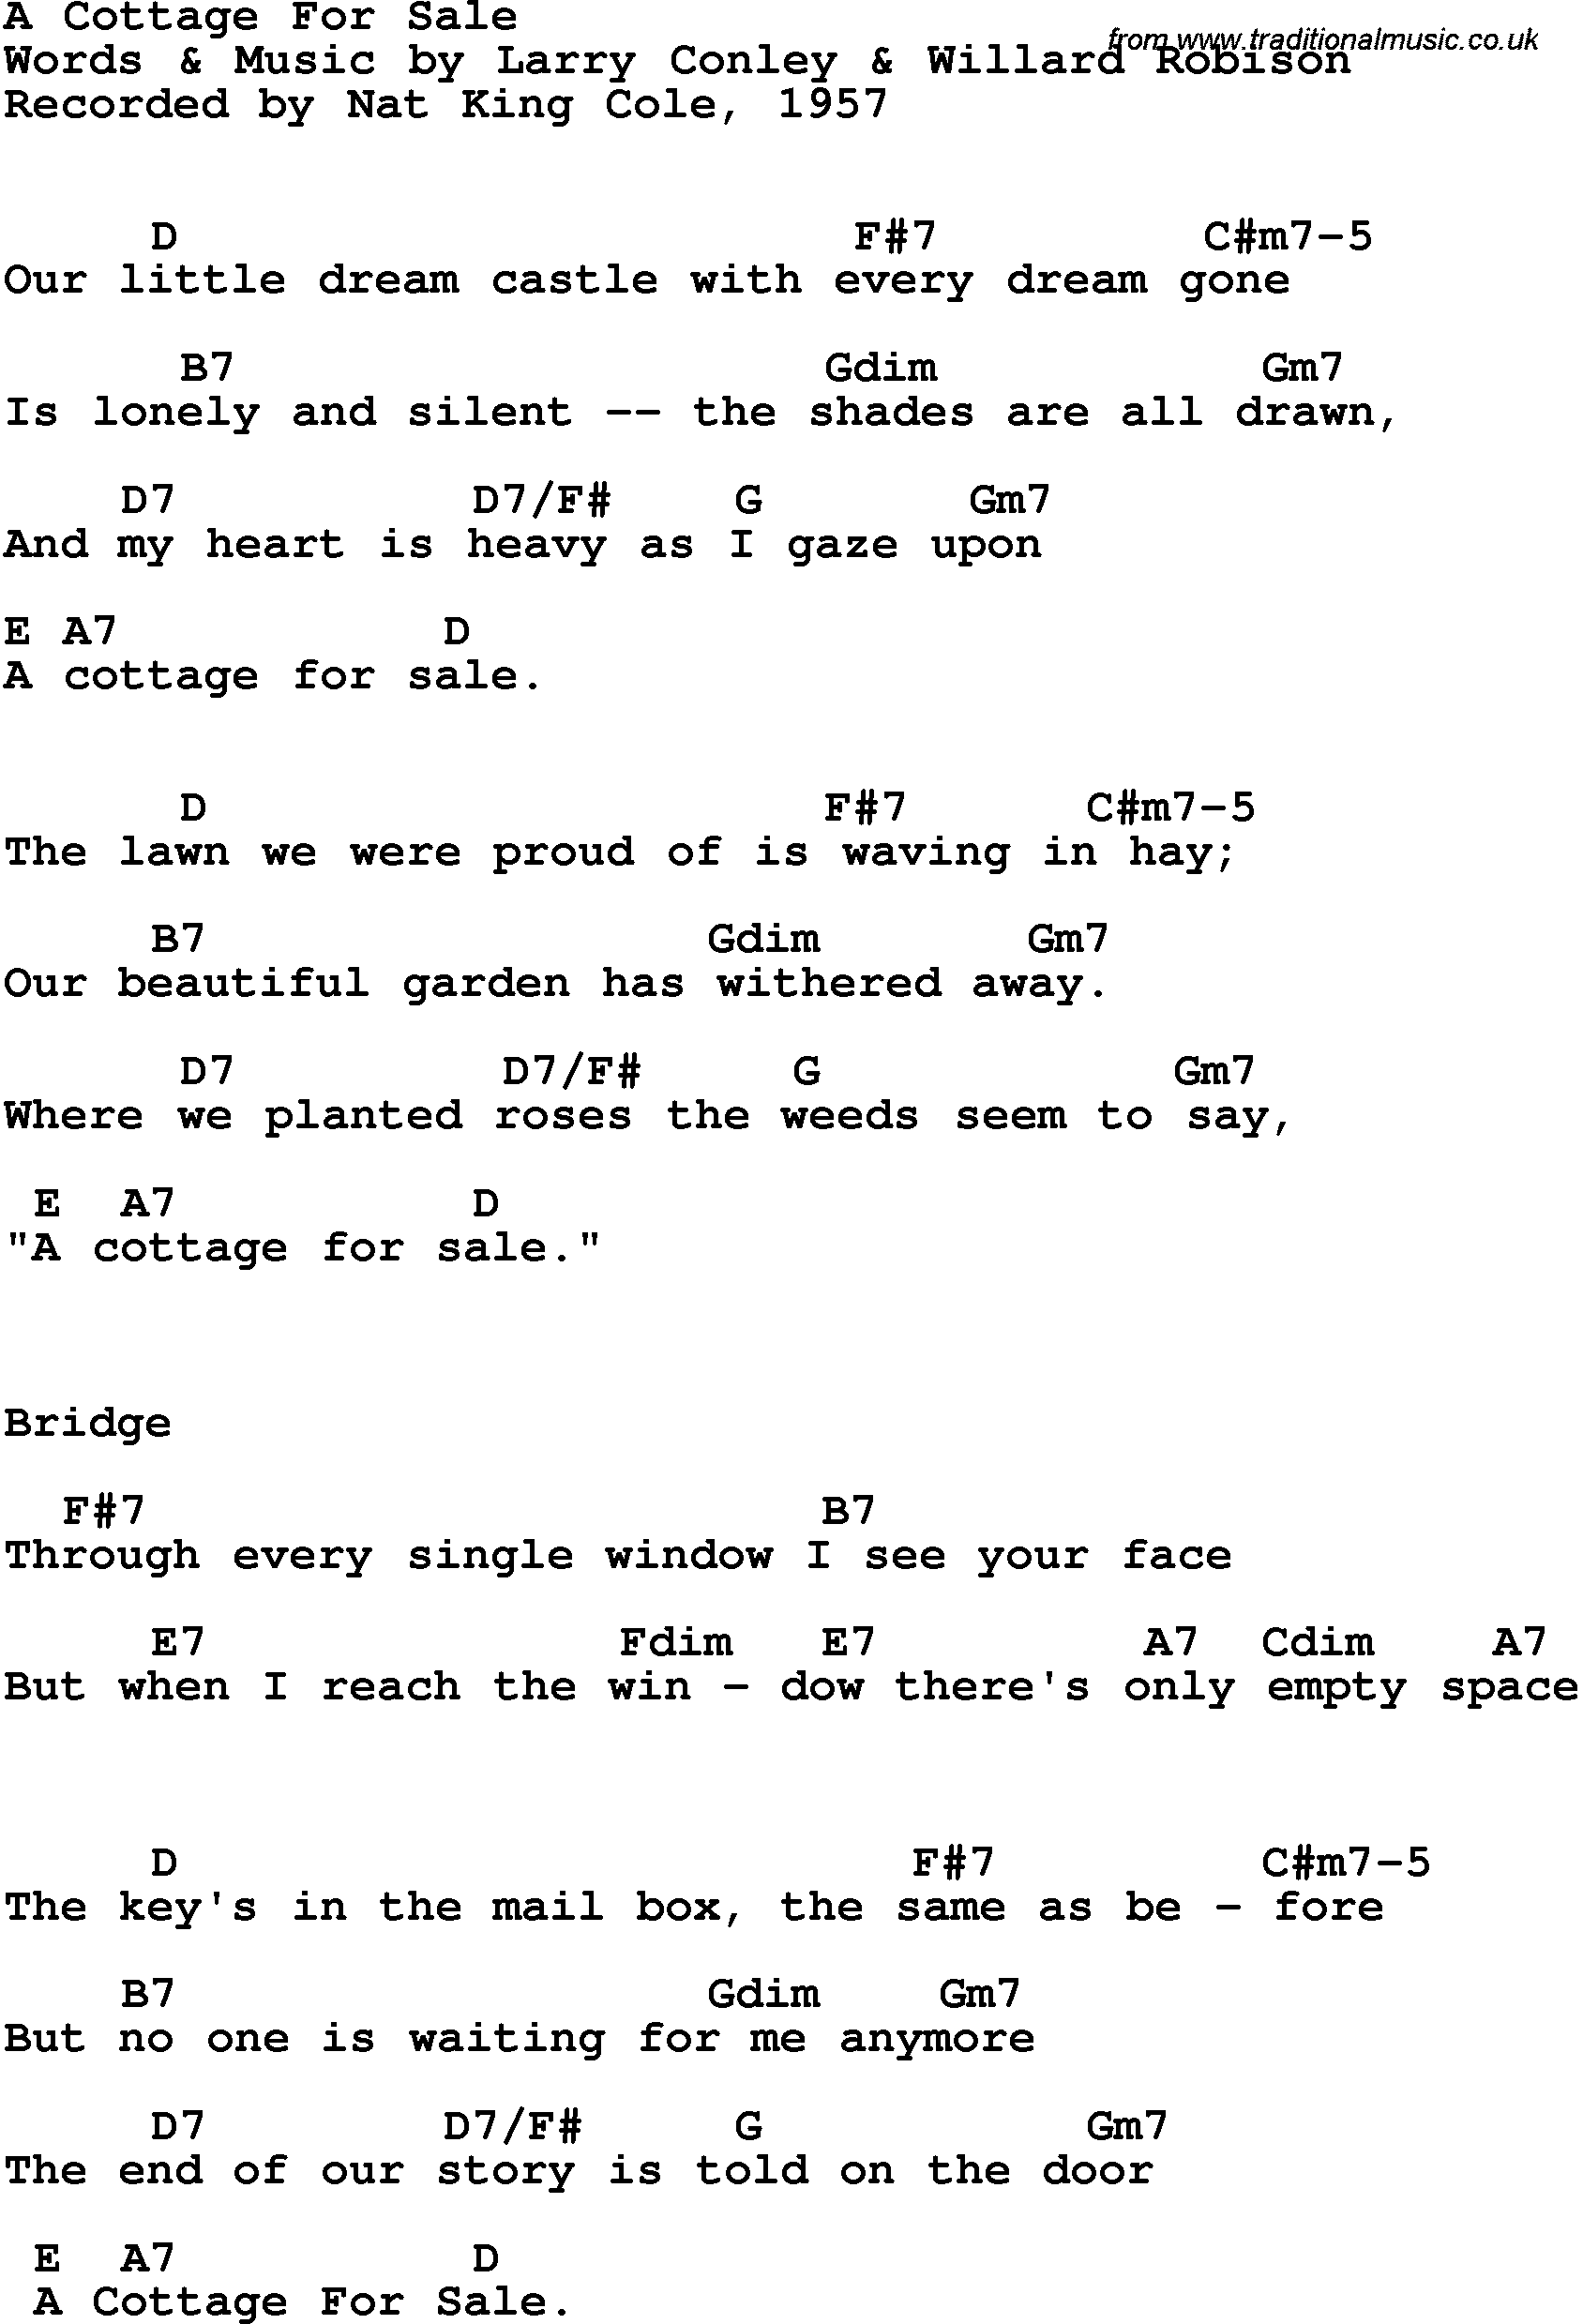 Song Lyrics with guitar chords for A Cottage For Sale - Nat King Cole, 1947